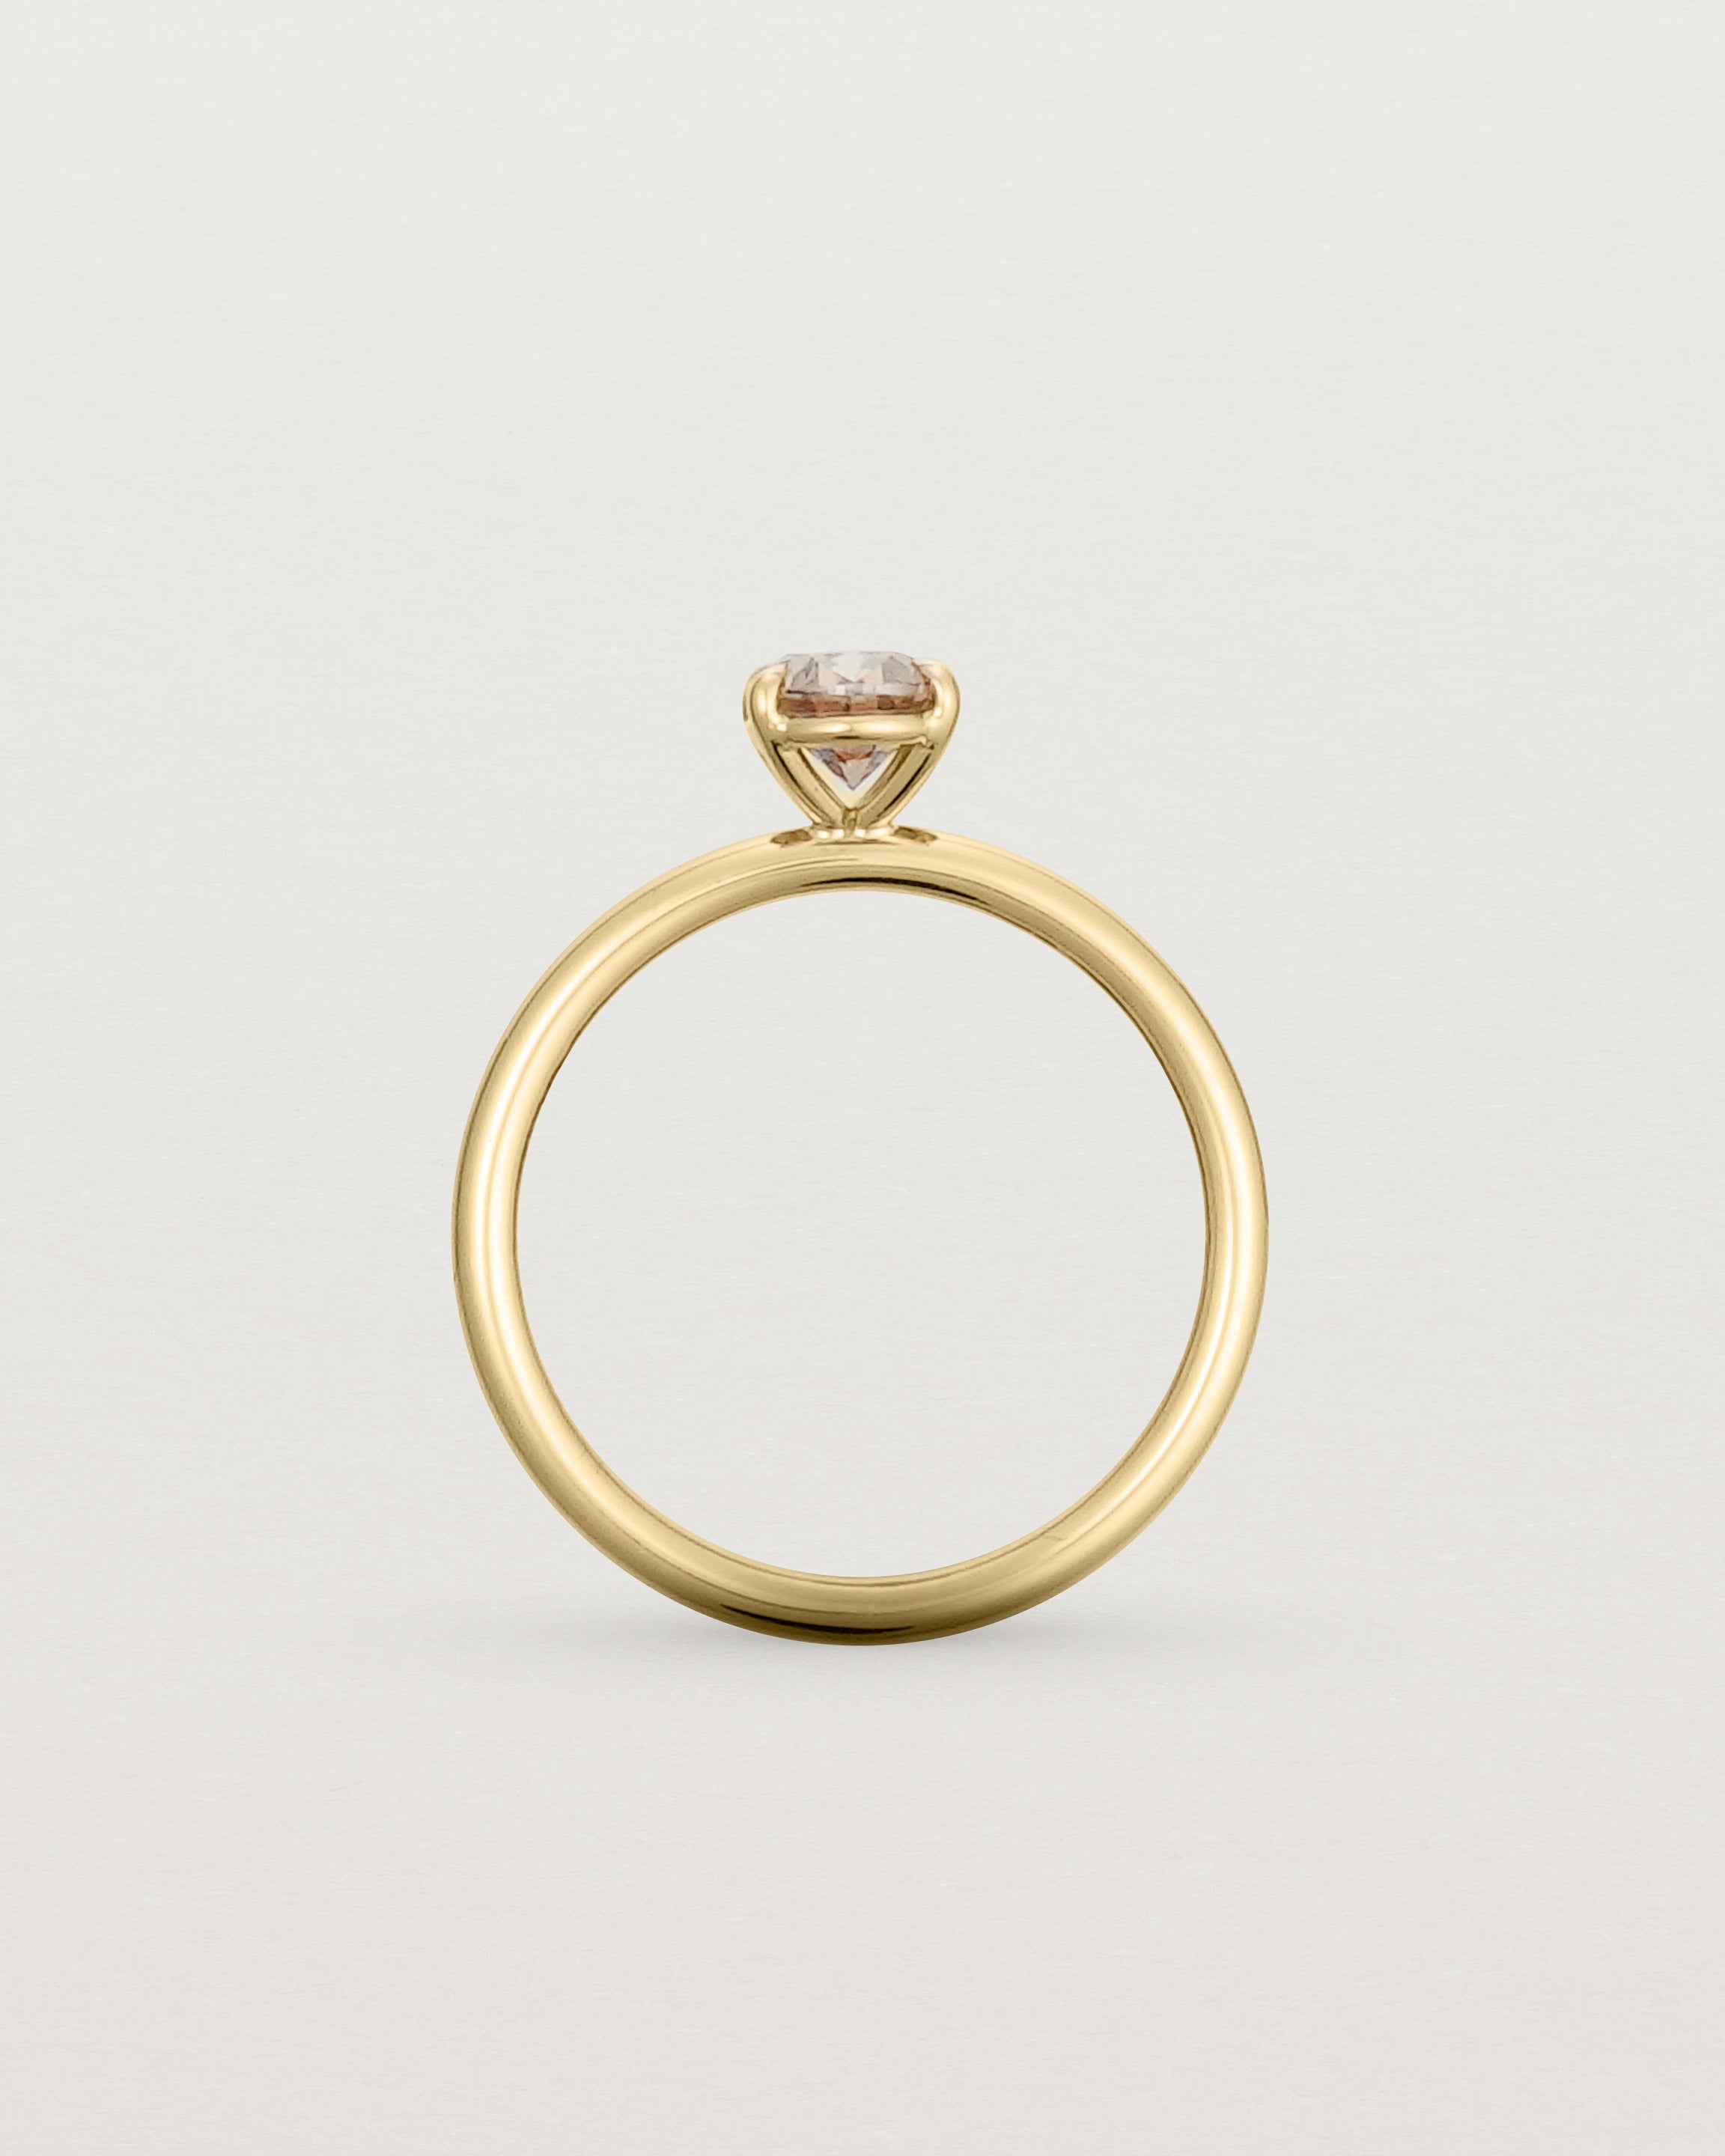 Standing view of the No.107 | Signature Solitaire | Argyle Diamond.